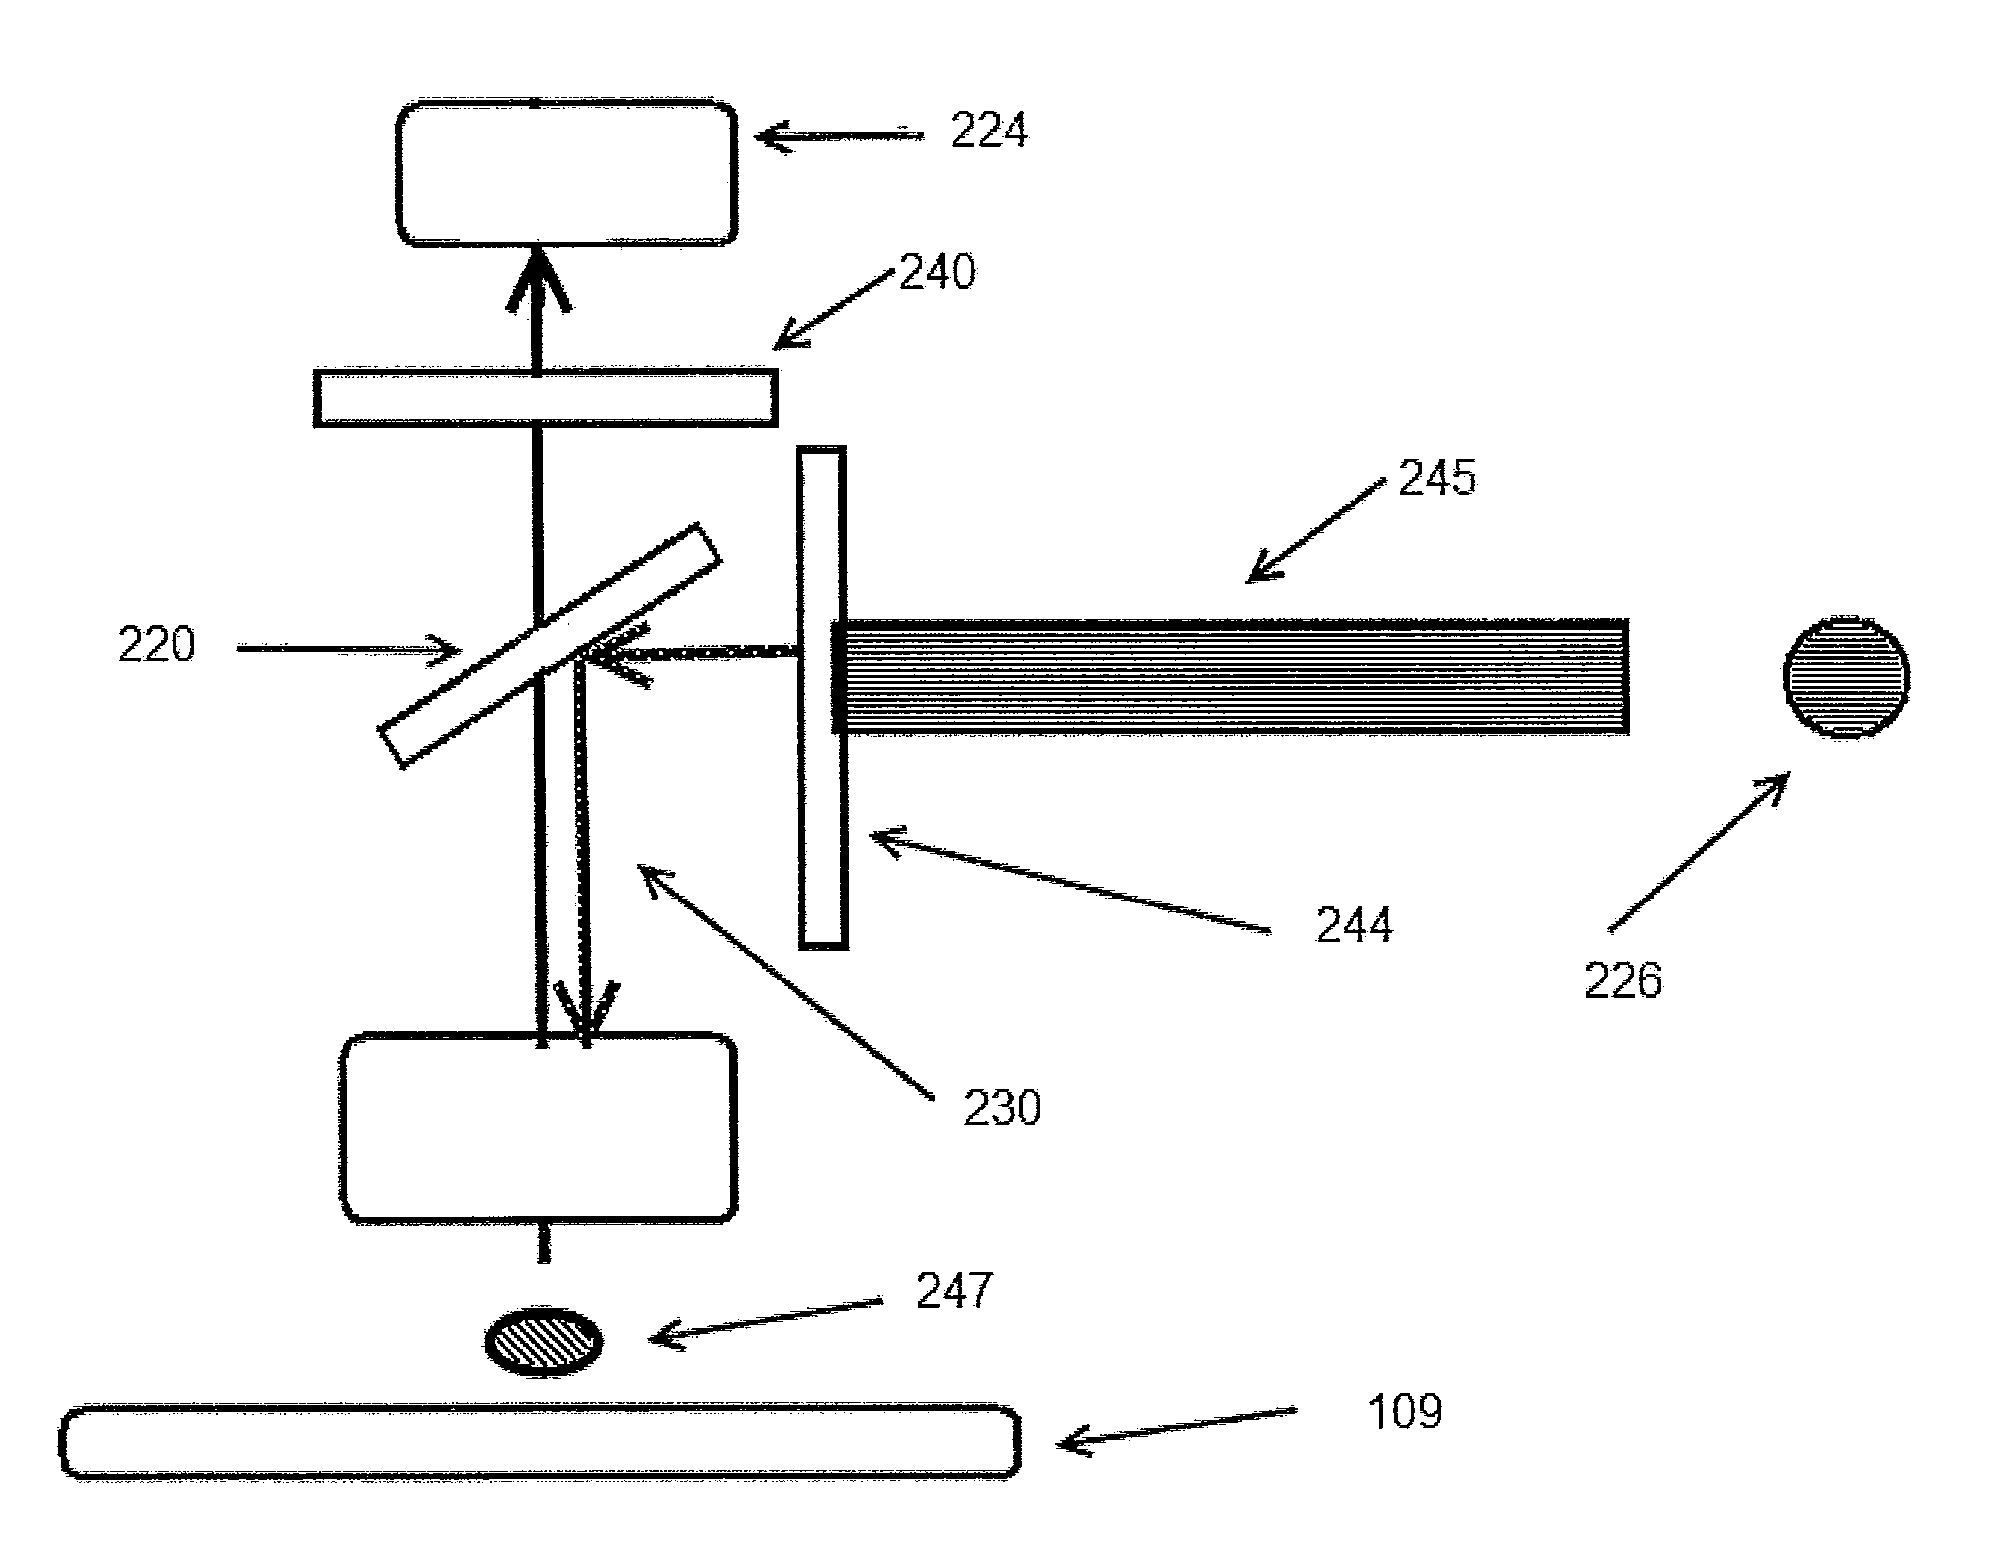 System and apparatus for the calibration and management of color in microscope slides